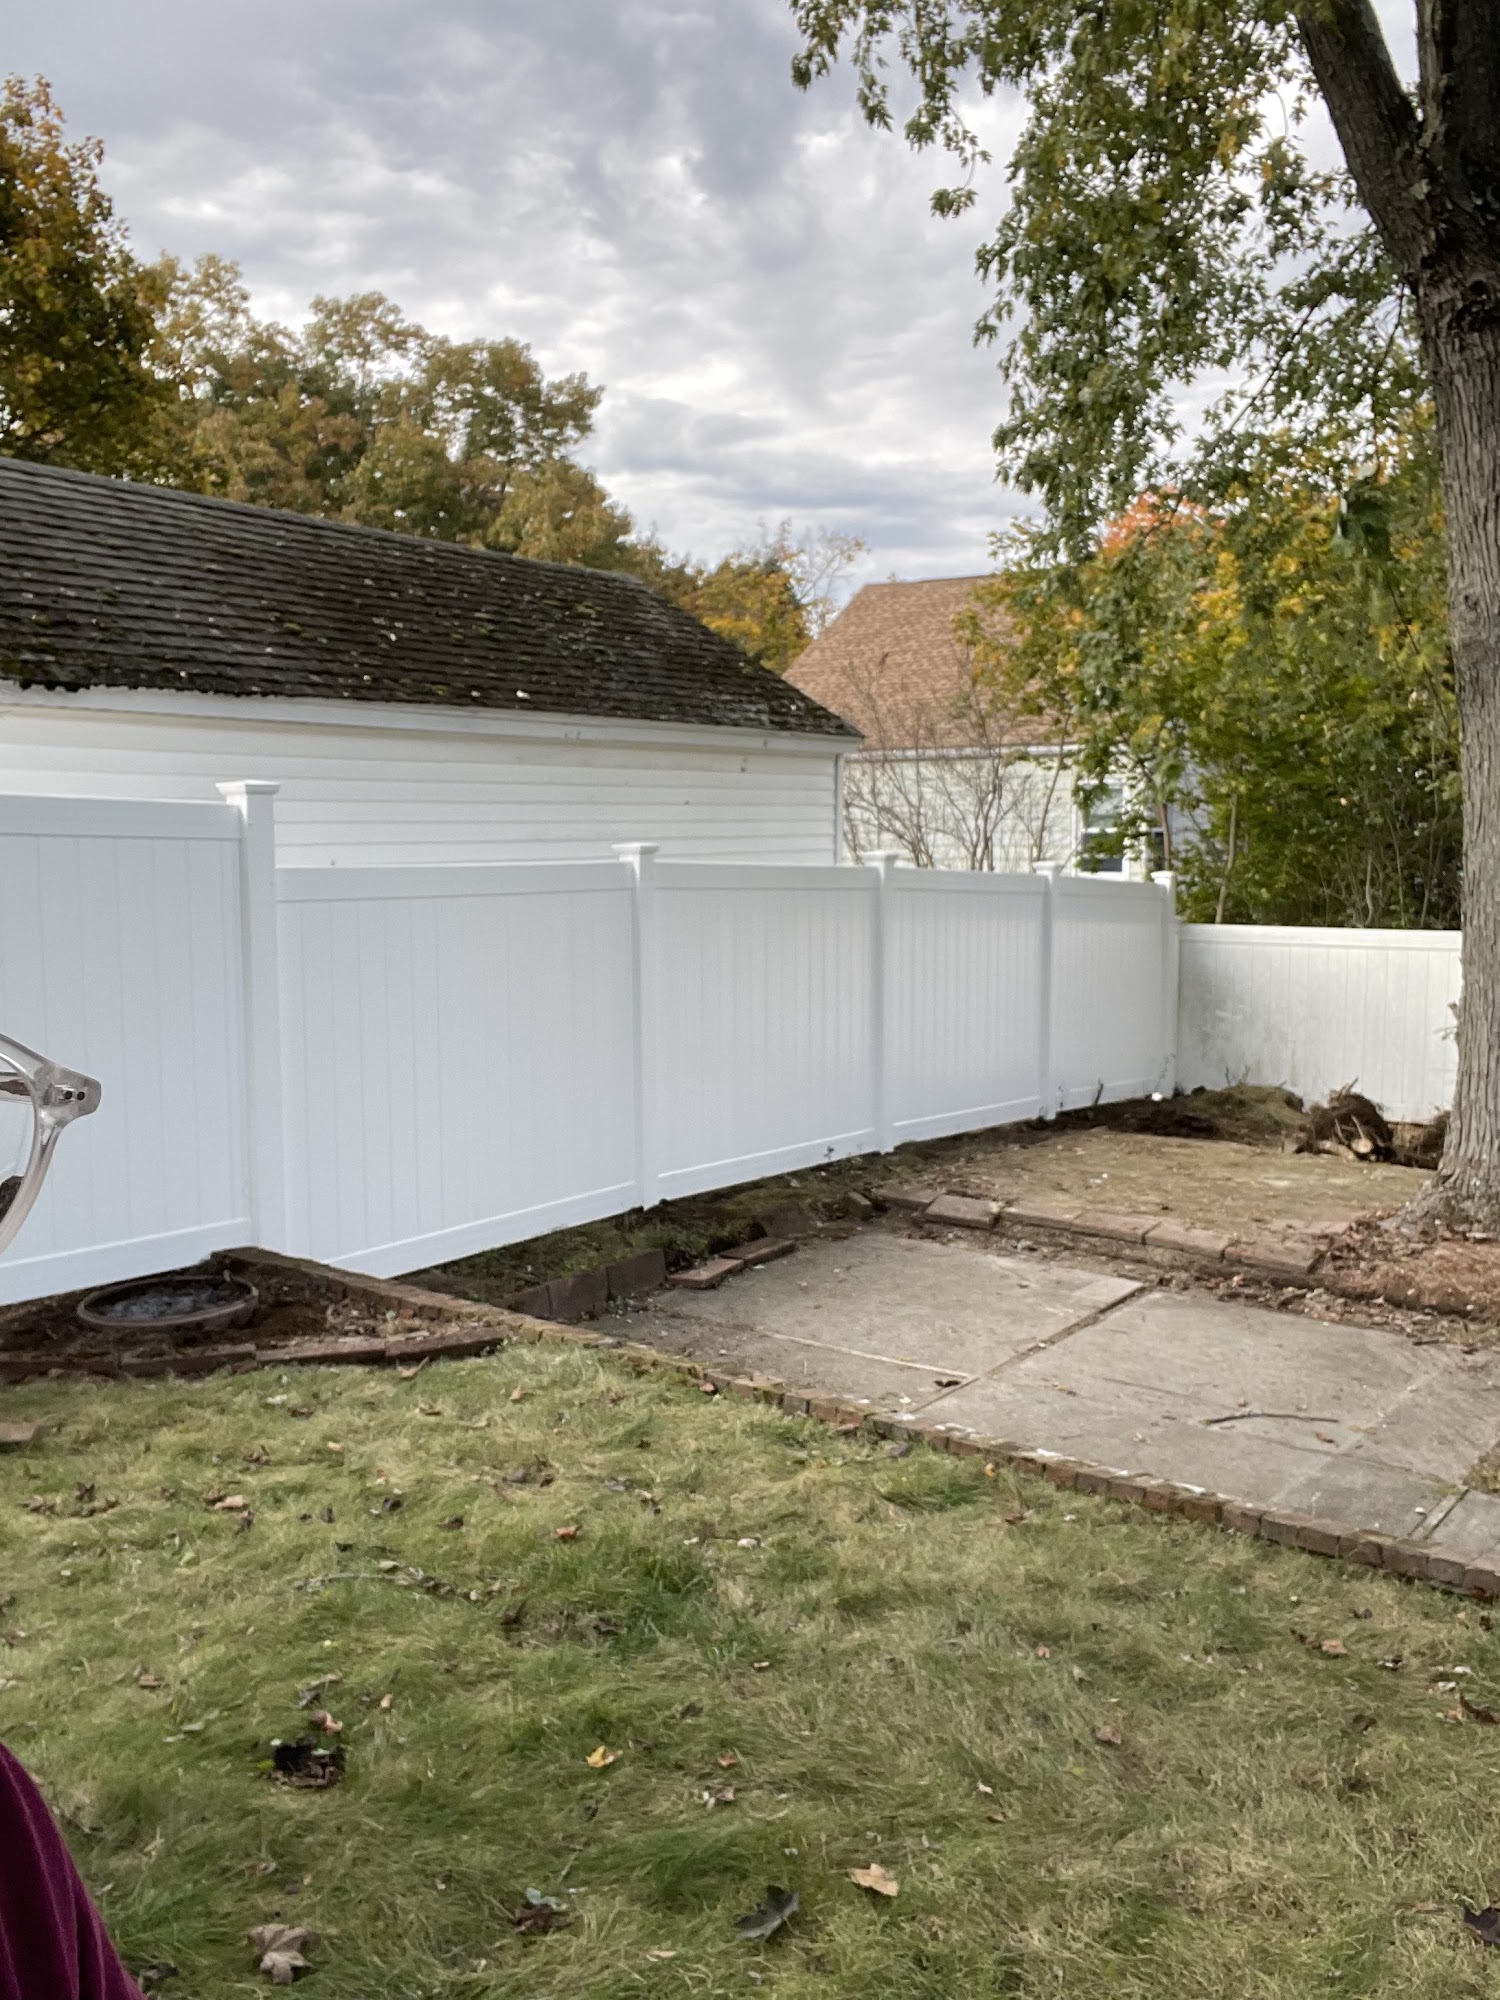 Reliable Fence MetroWest